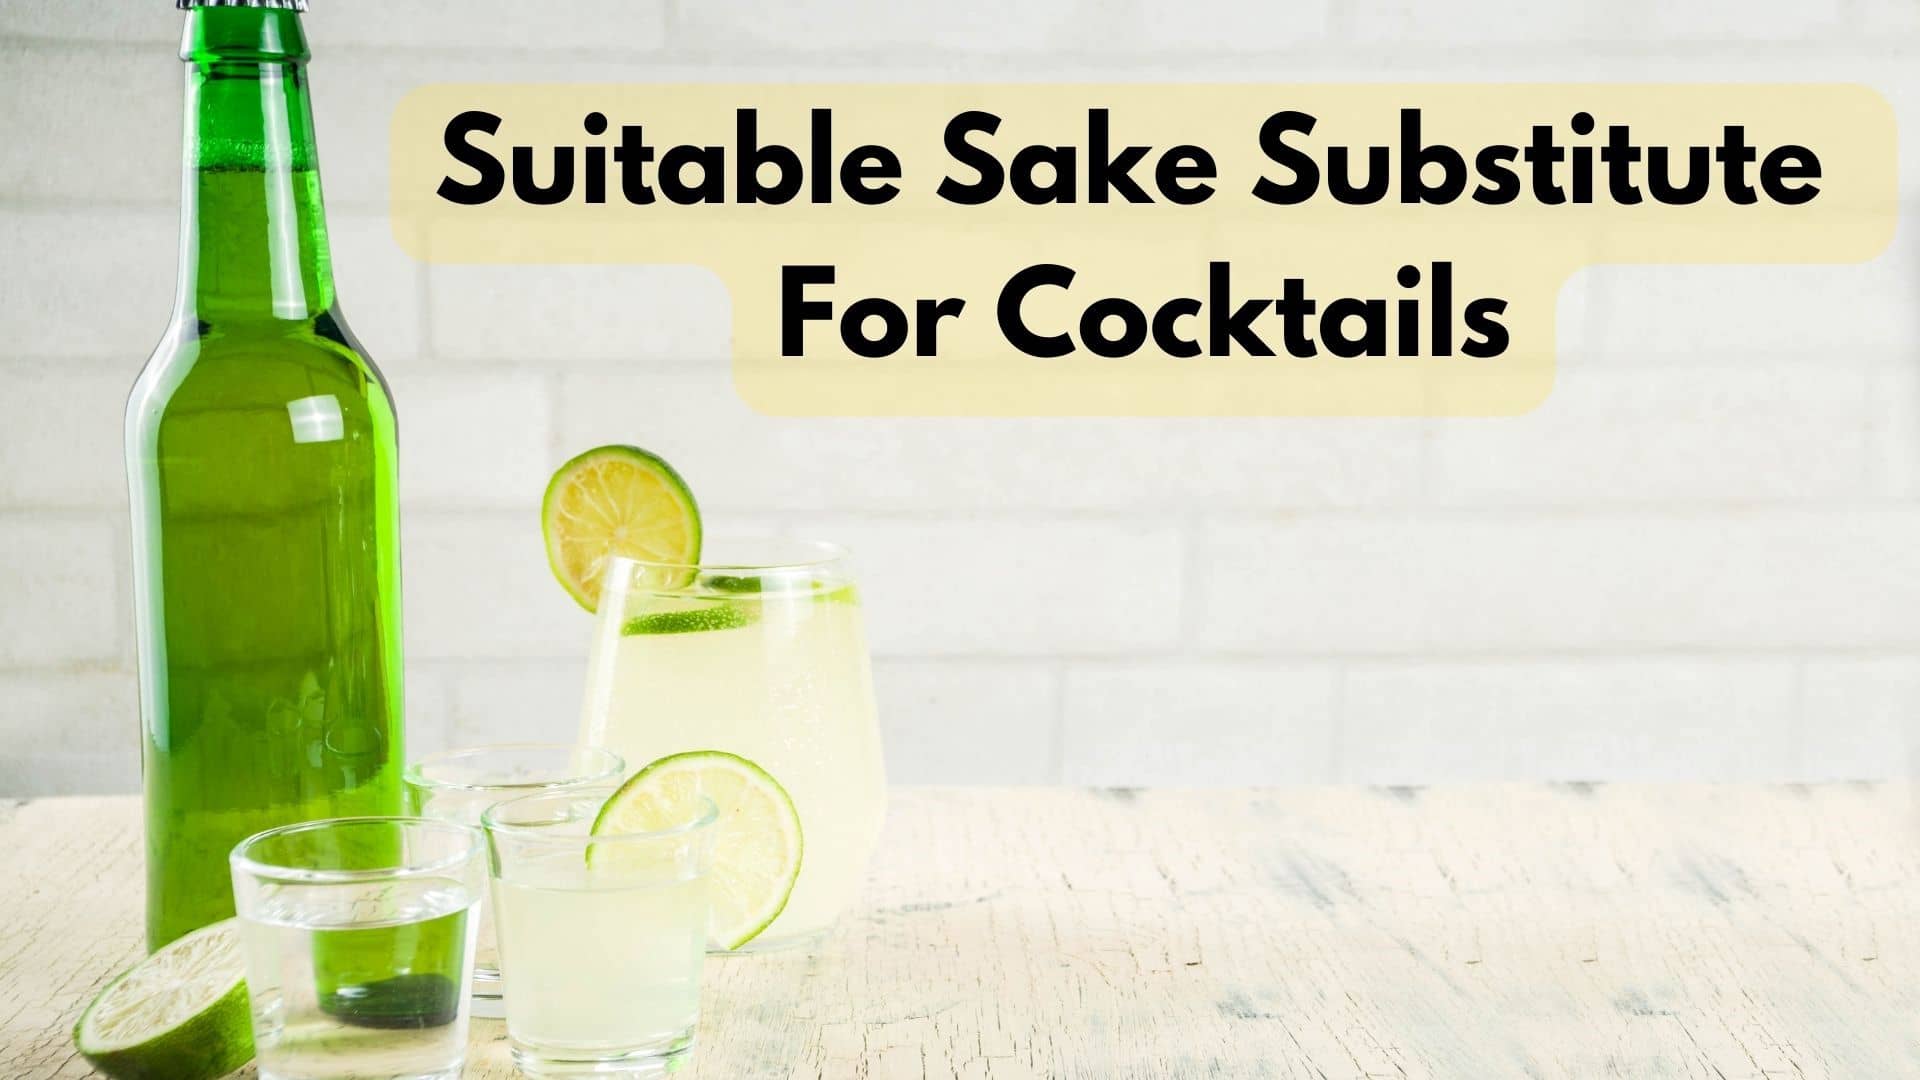 Is There Any Suitable Sake Substitute For Cocktails?